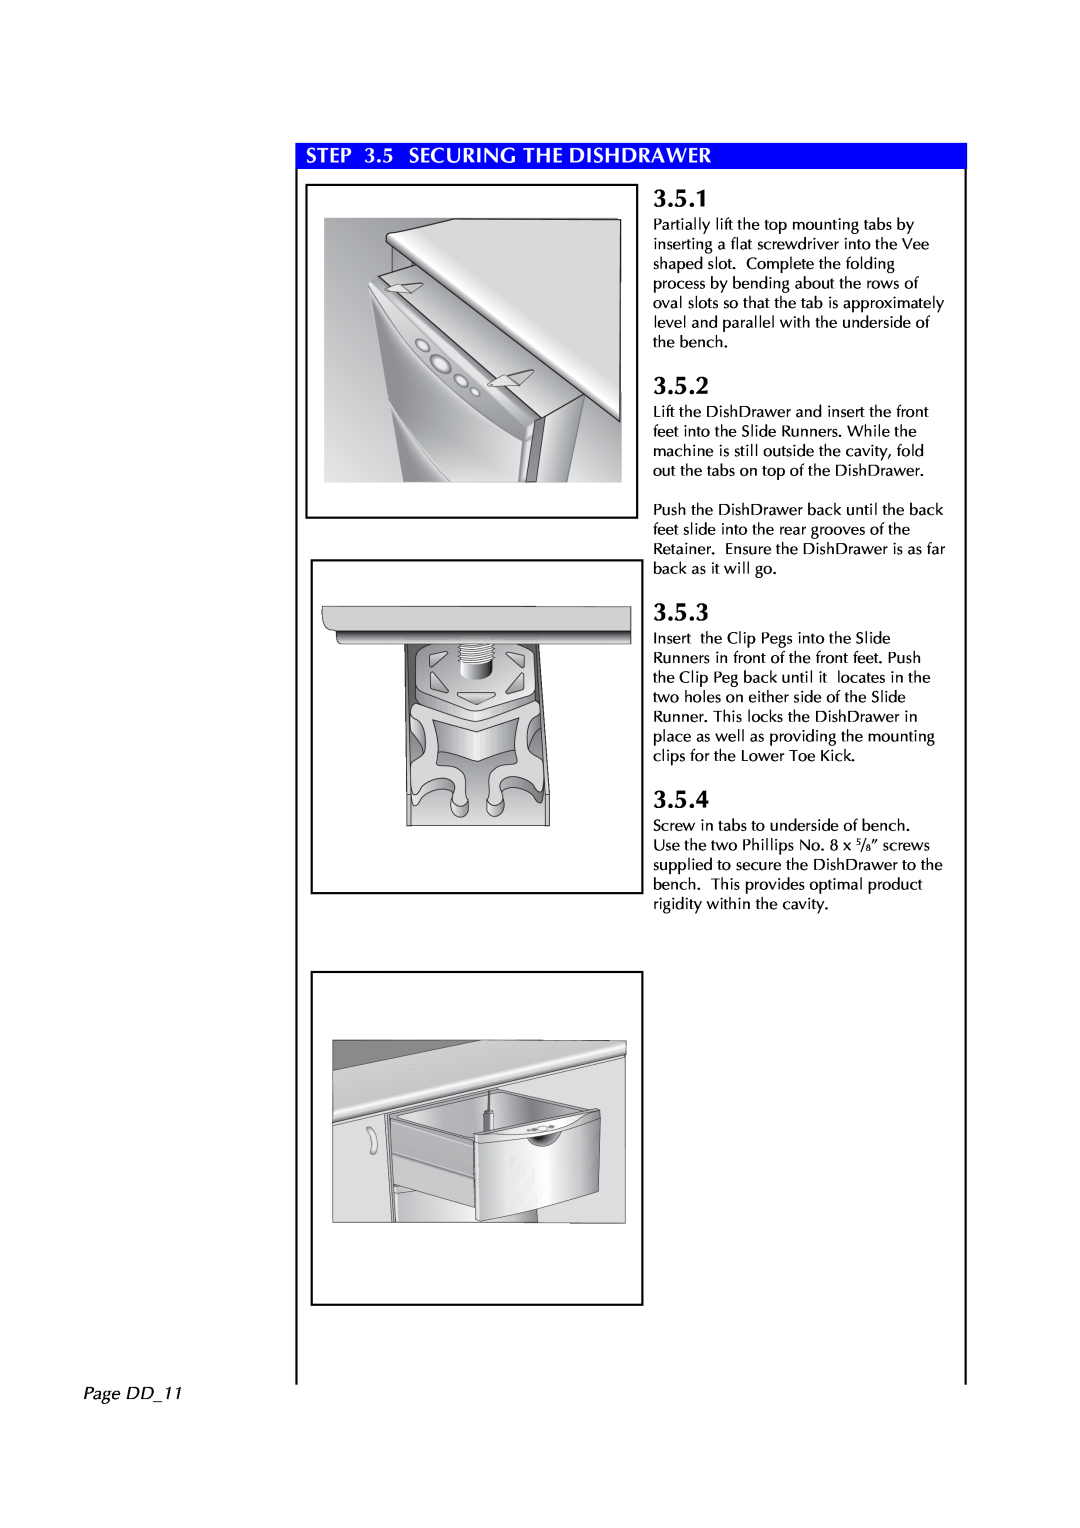 Fisher & Paykel DD602I manual 3.5.1, 3.5.2, 3.5.3, 3.5.4, 5 SECURING THE DISHDRAWER, Page DD11 